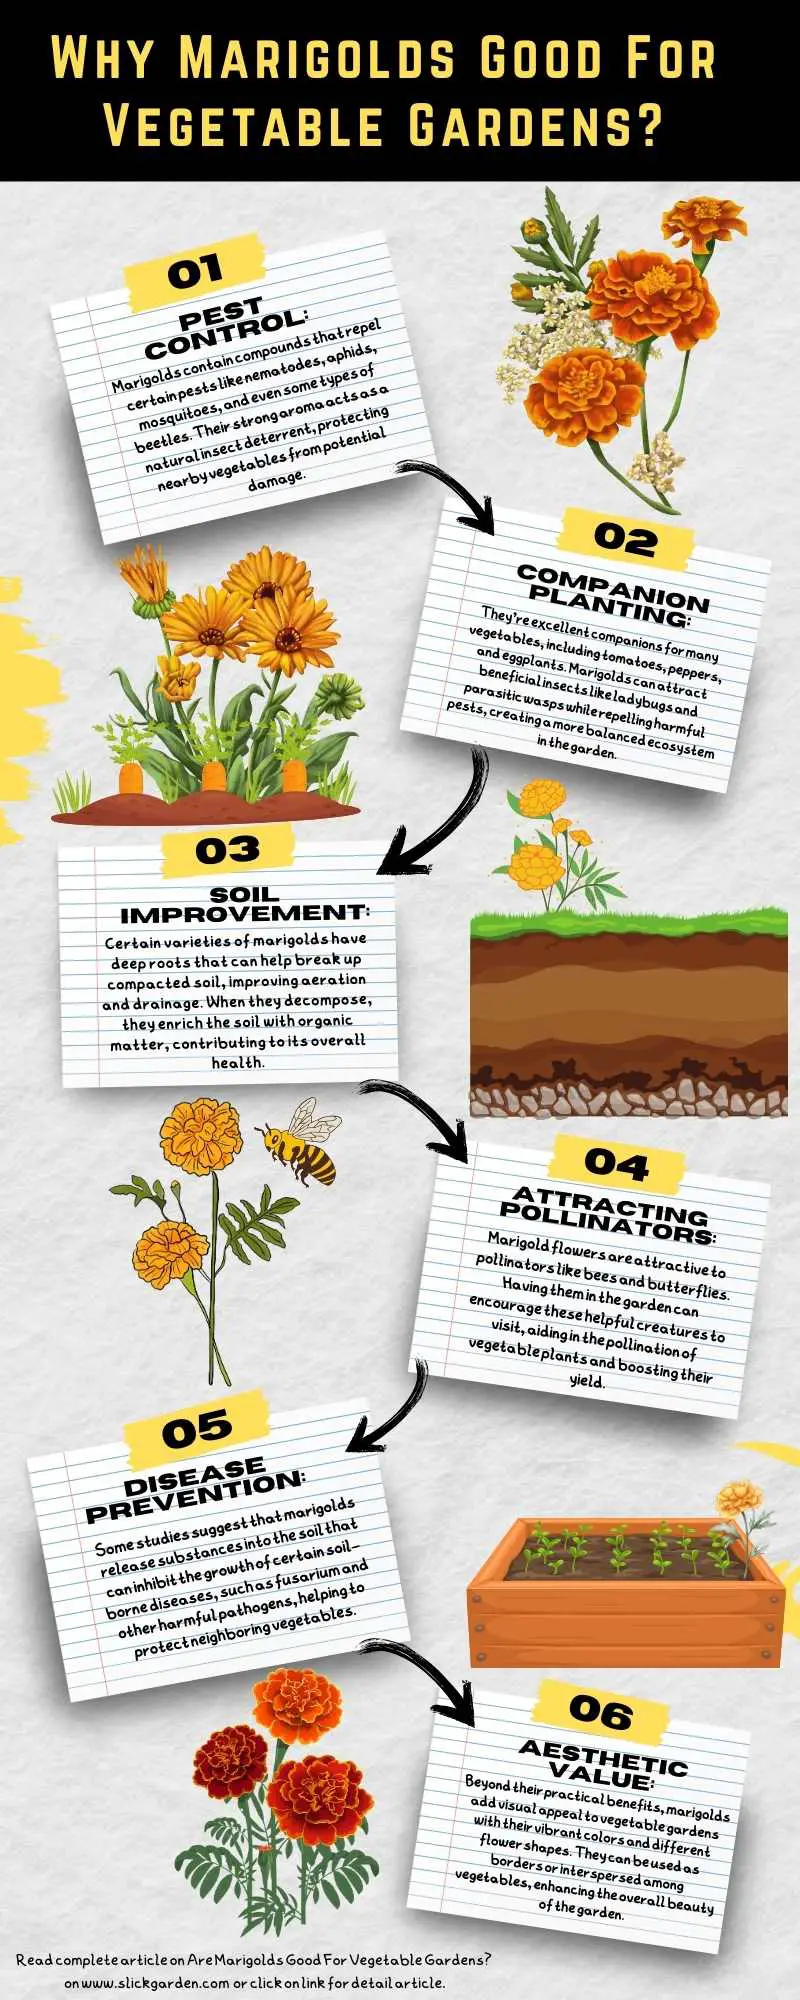 Why Marigolds Good For Vegetable Gardens? infographic